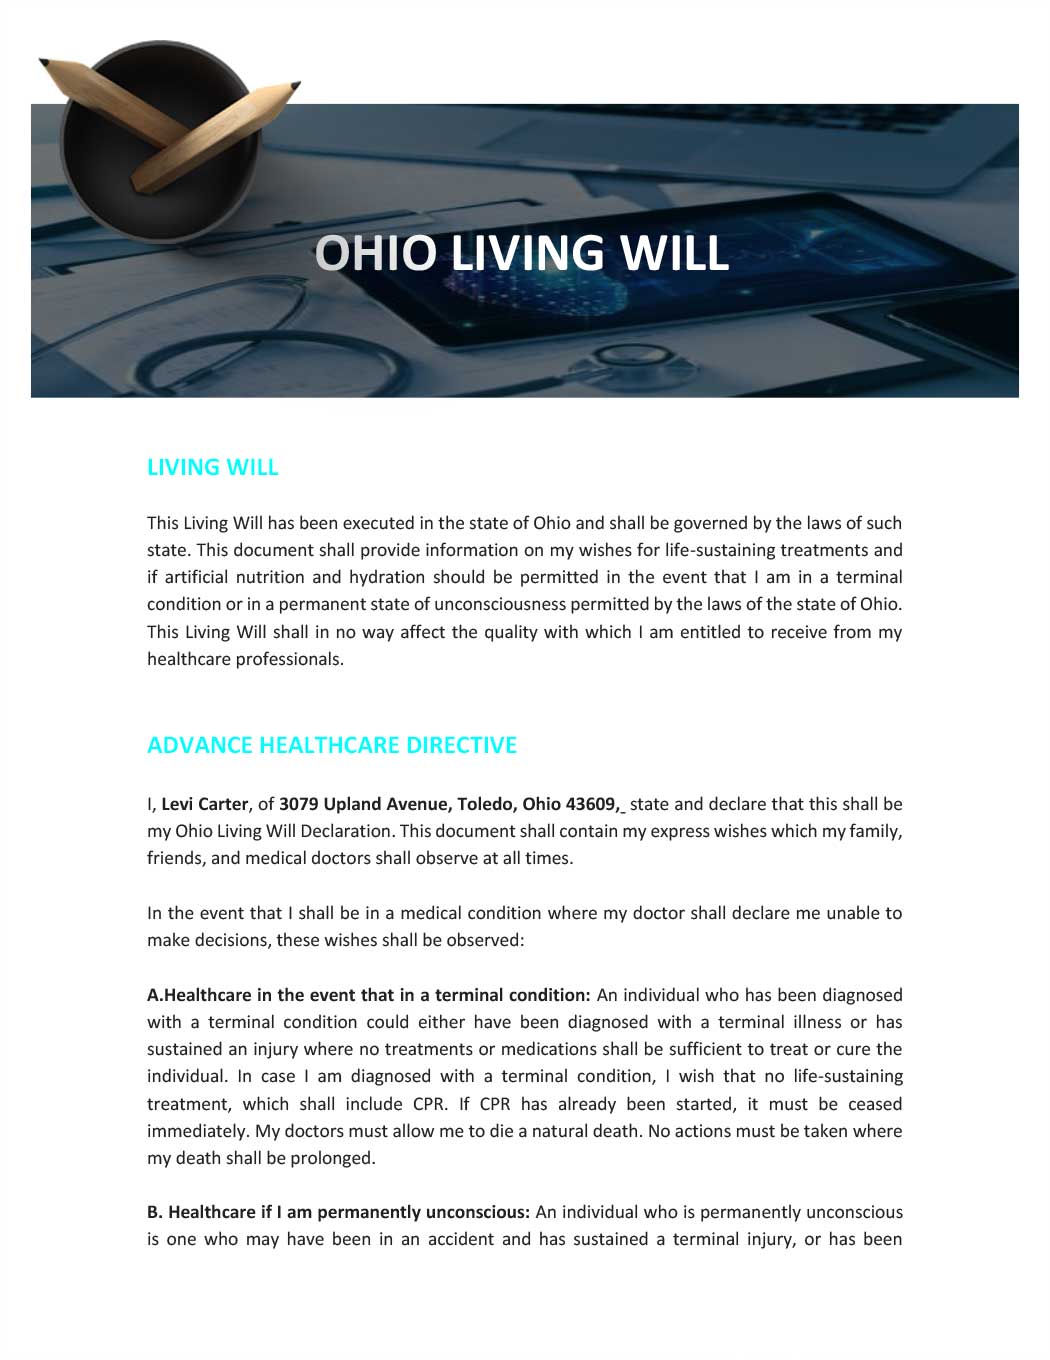 ohio-living-will-template-download-in-word-google-docs-template